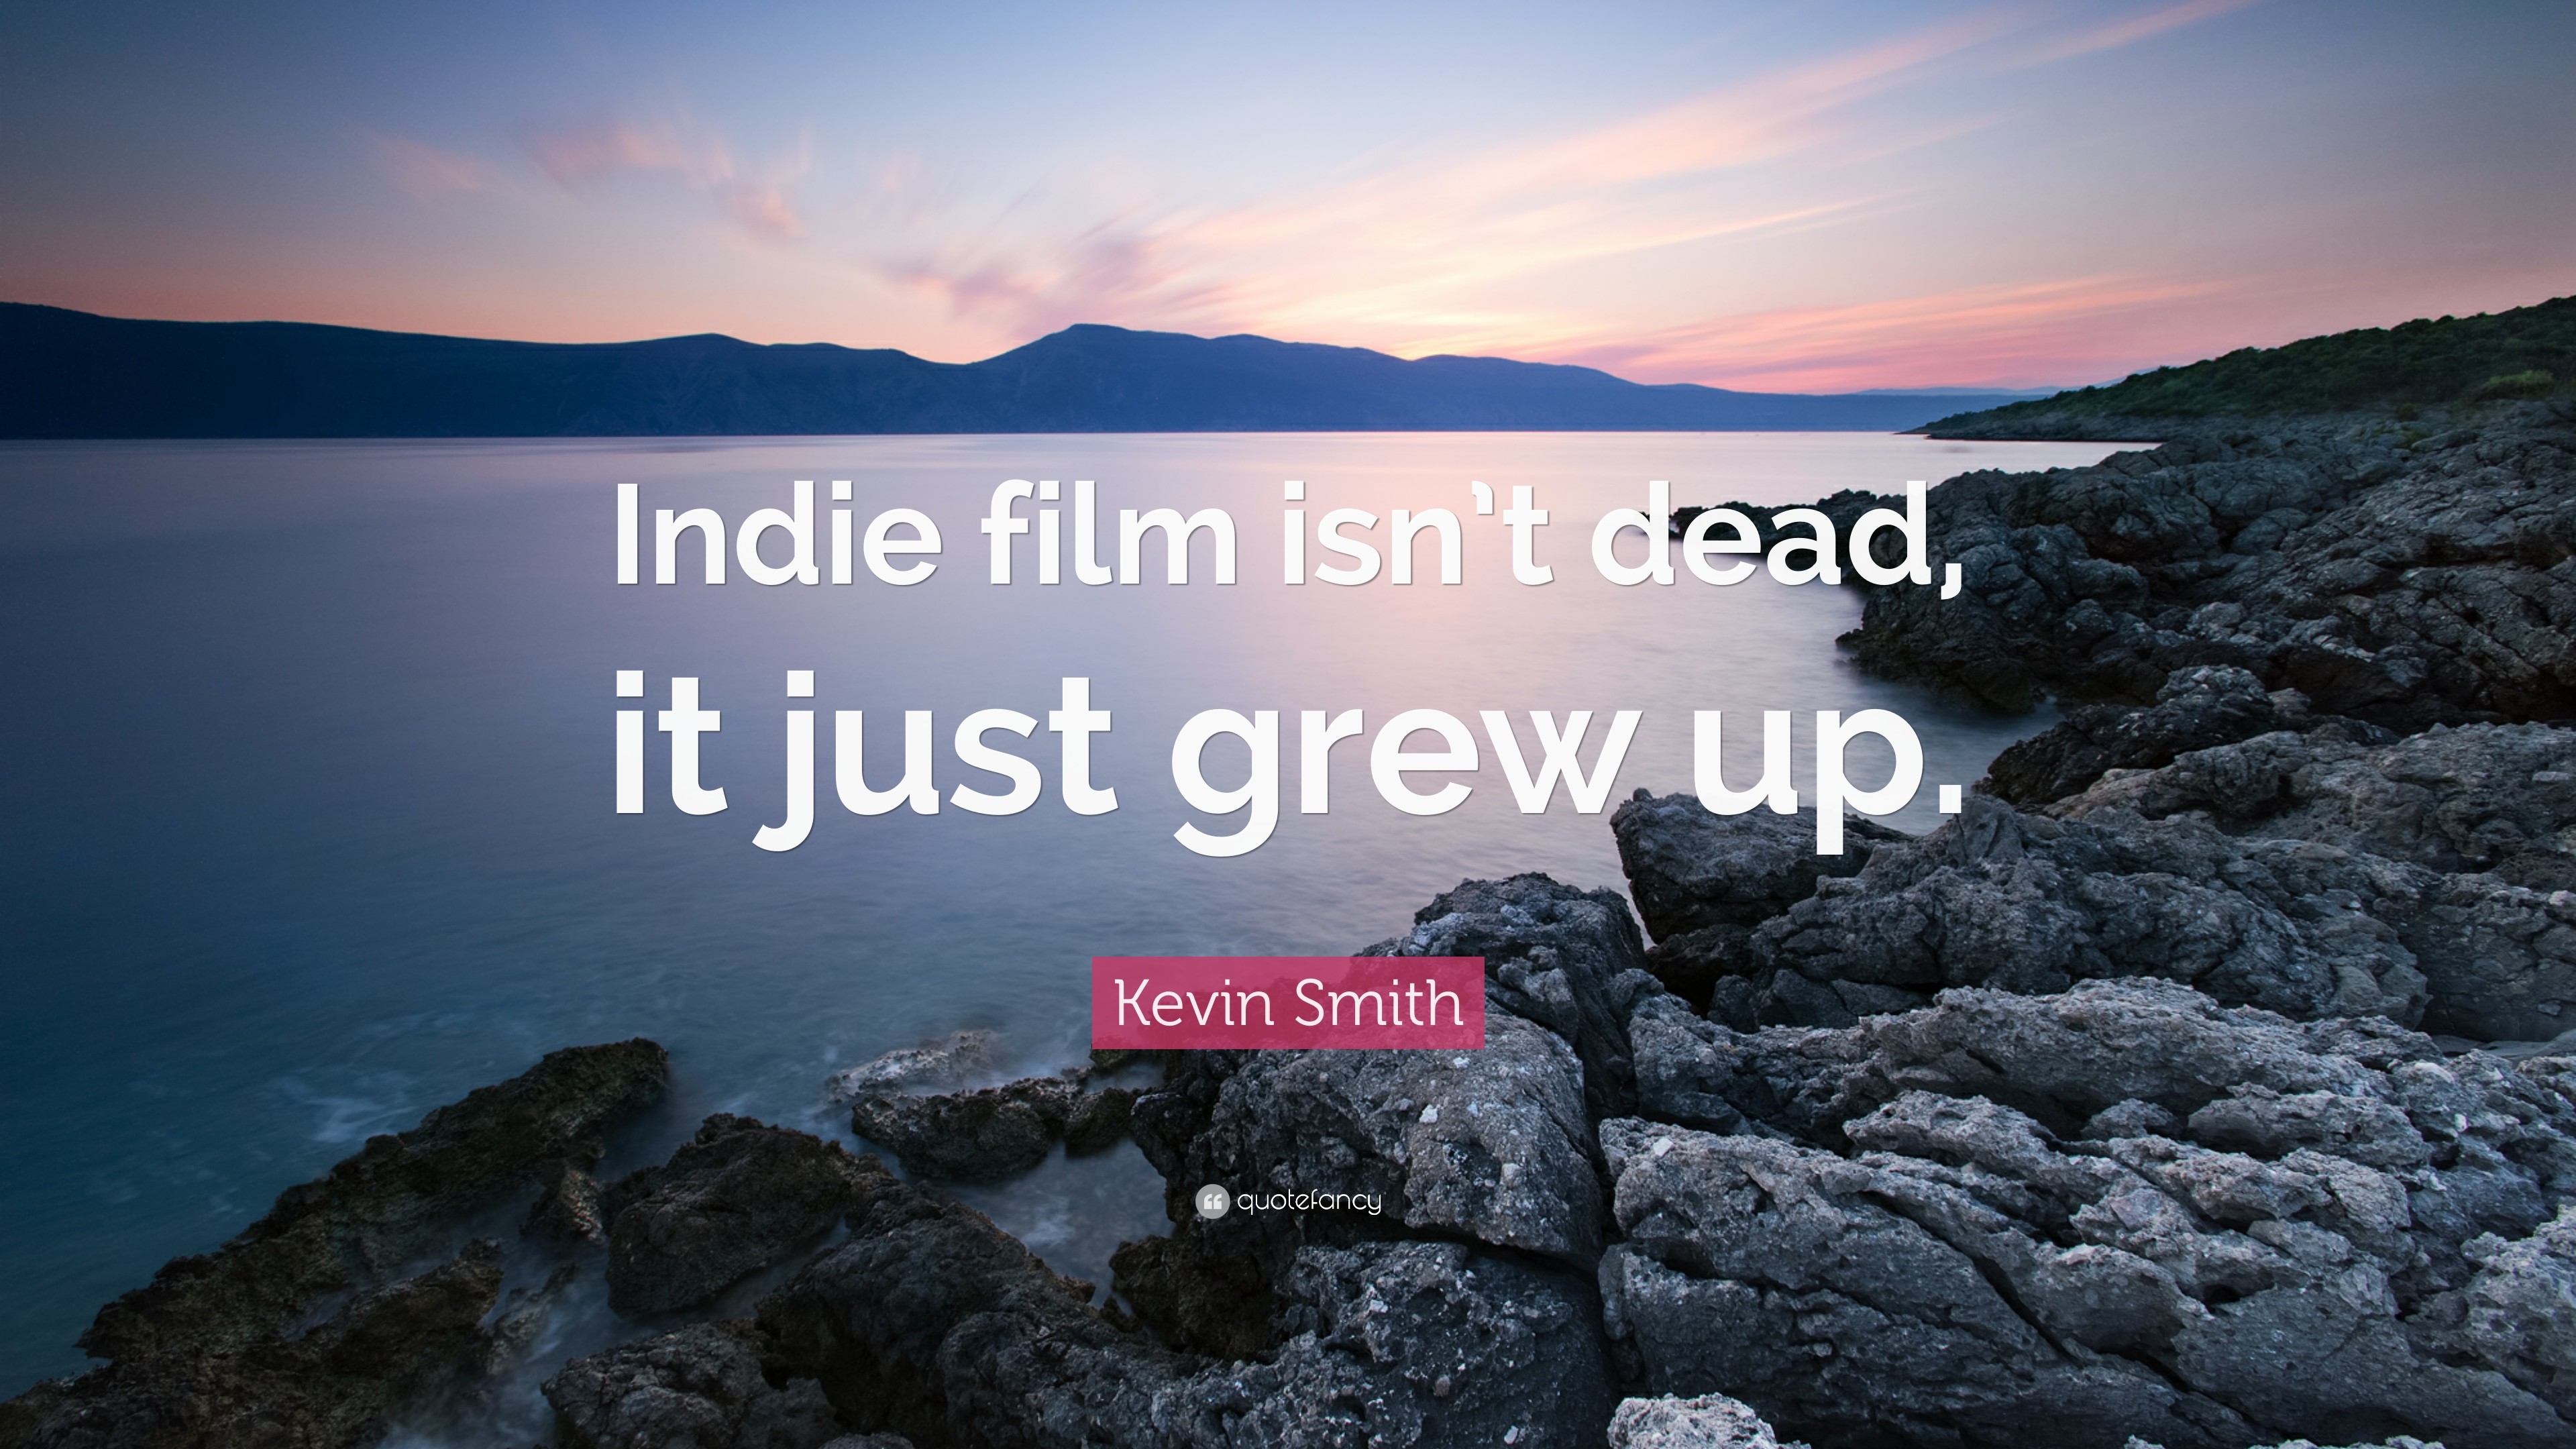 3840x2160 Kevin Smith Quote: “Indie film isn't dead, it just grew up